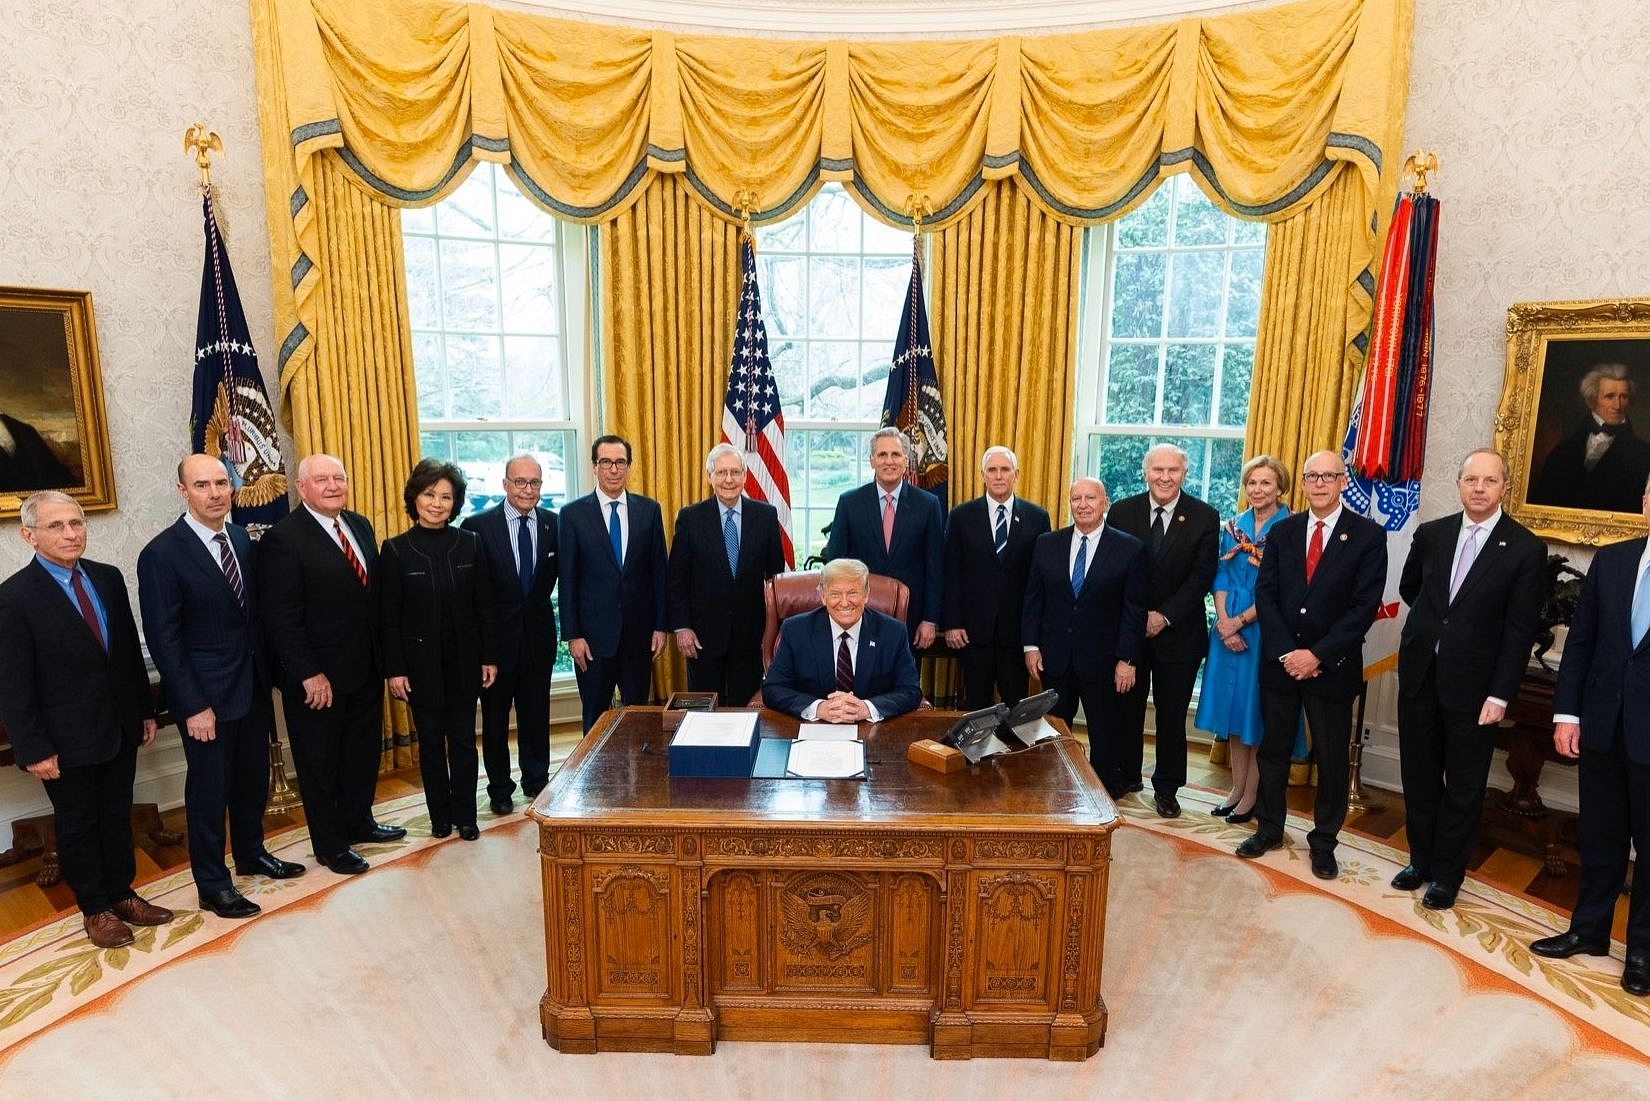 Trump with Senator Mitch McConnell and others during the signing of the bill (Pic Via Twitter)